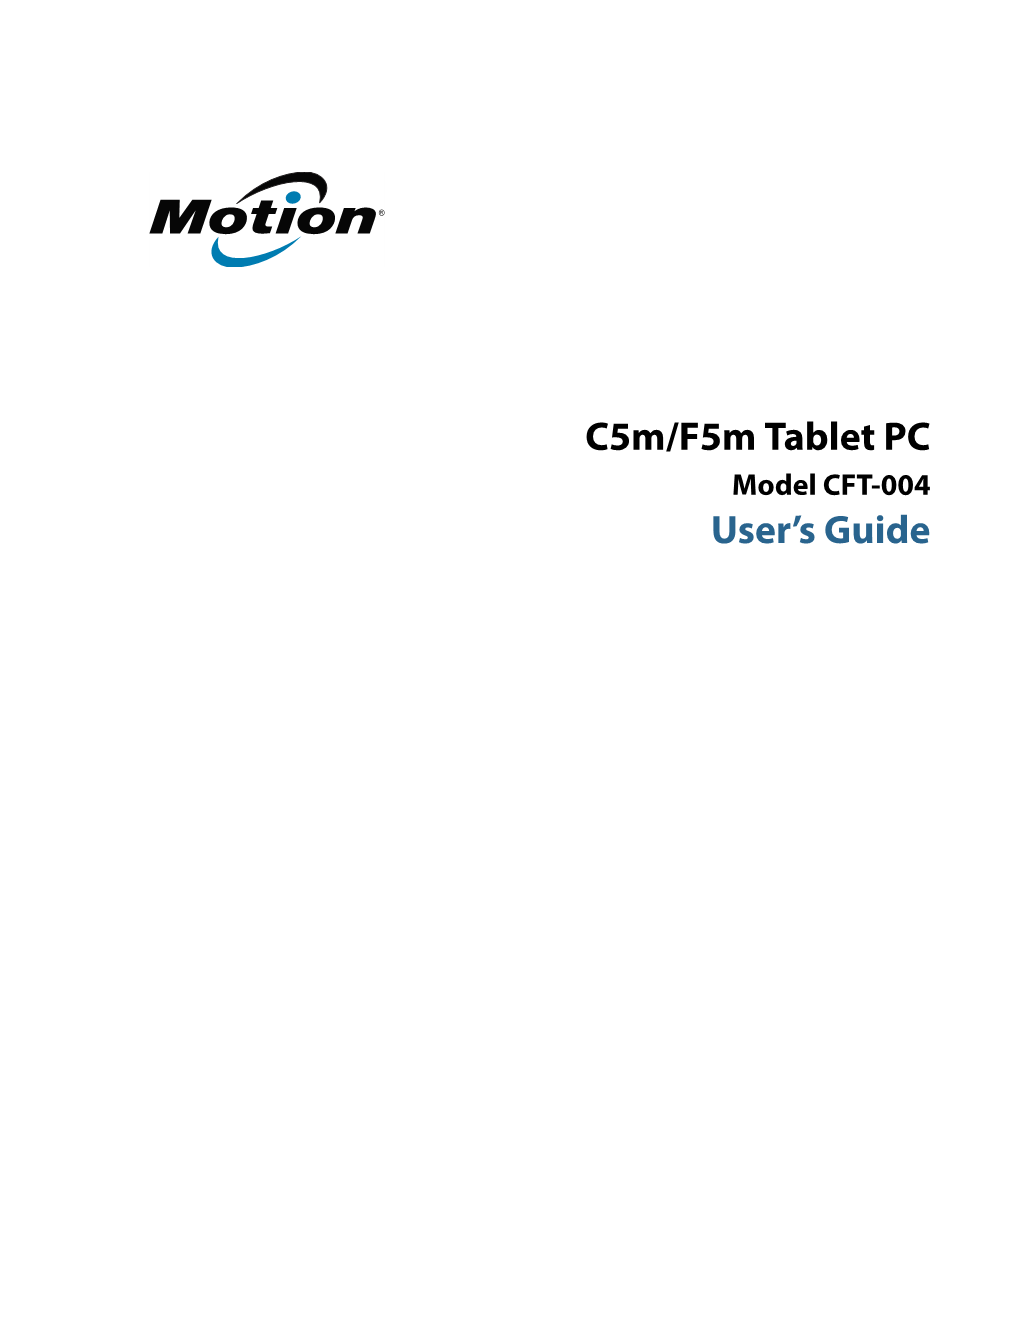 C5m/F5m Tablet PC Model CFT-004 User's Guide